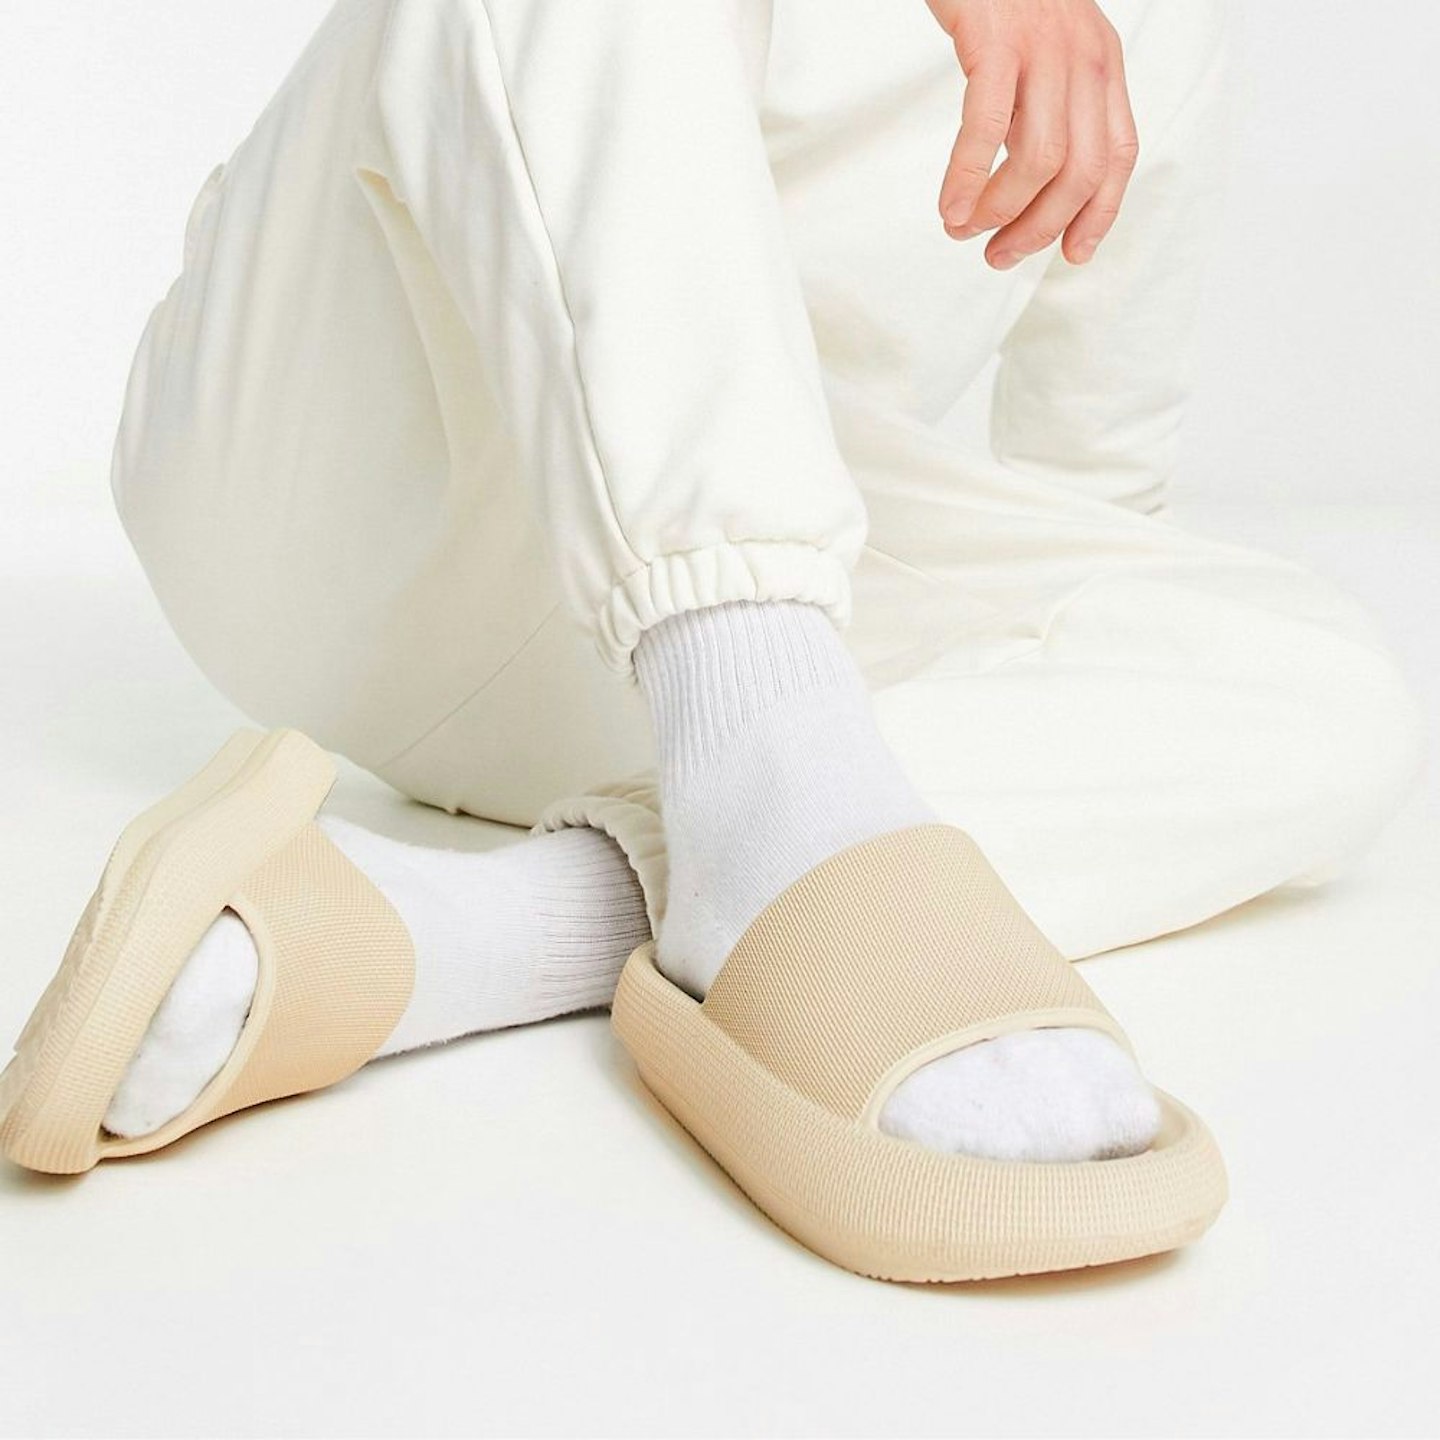 https://www.asos.com/truffle-collection/truffle-collection-extra-chunky-sliders-in-cream/prd/203854471